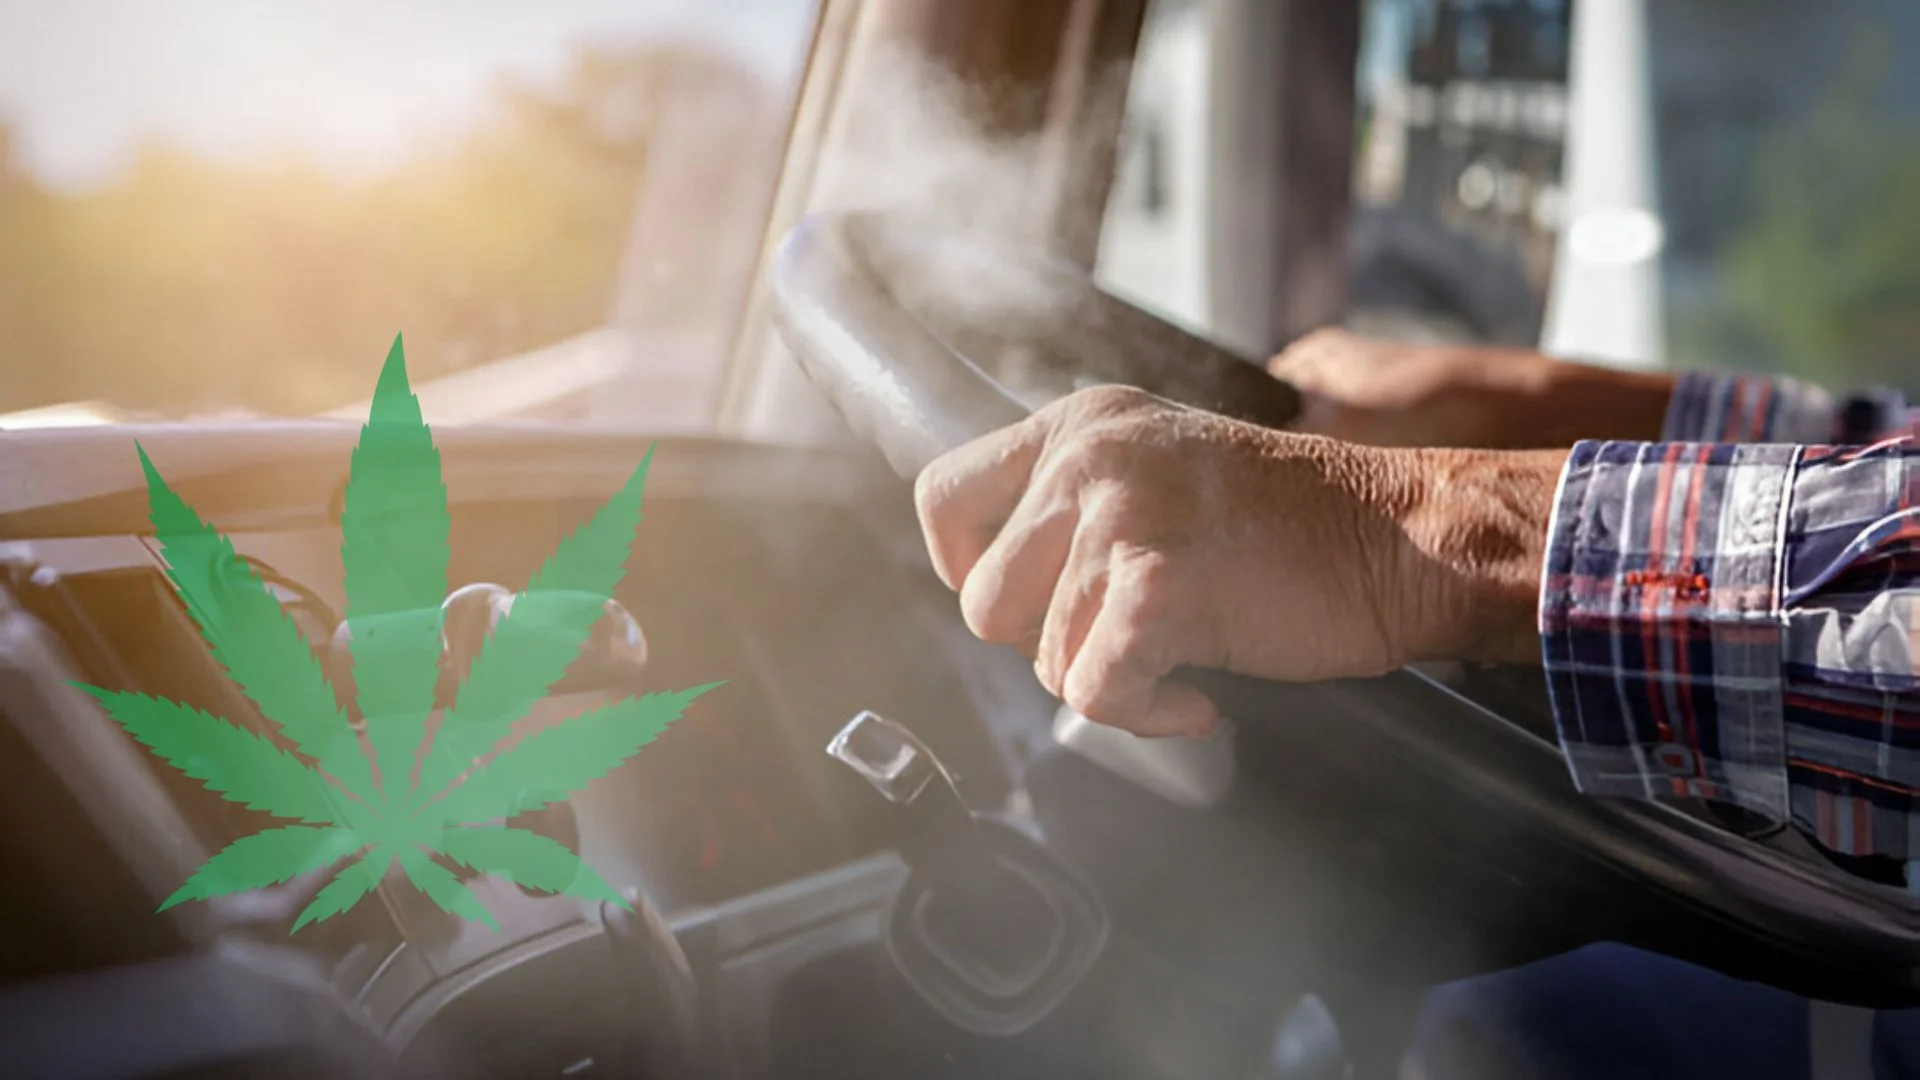 Why Truckers Feel the Need to Use Pot?